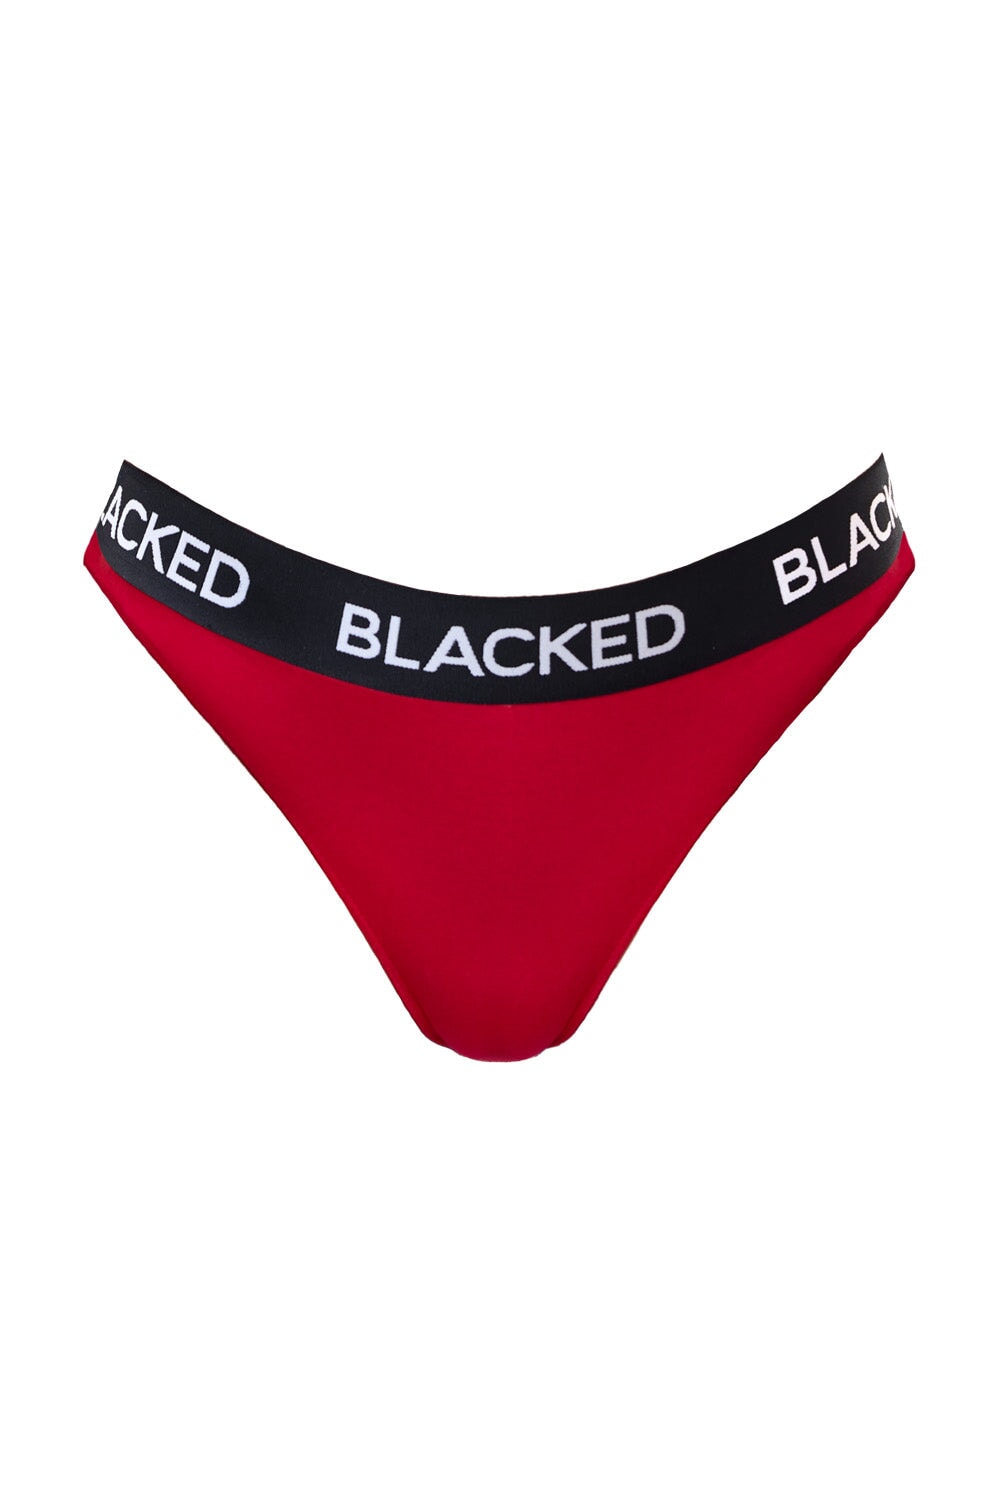 Blacked 10th Anniversary Thong Panty Lingerie Blacked 